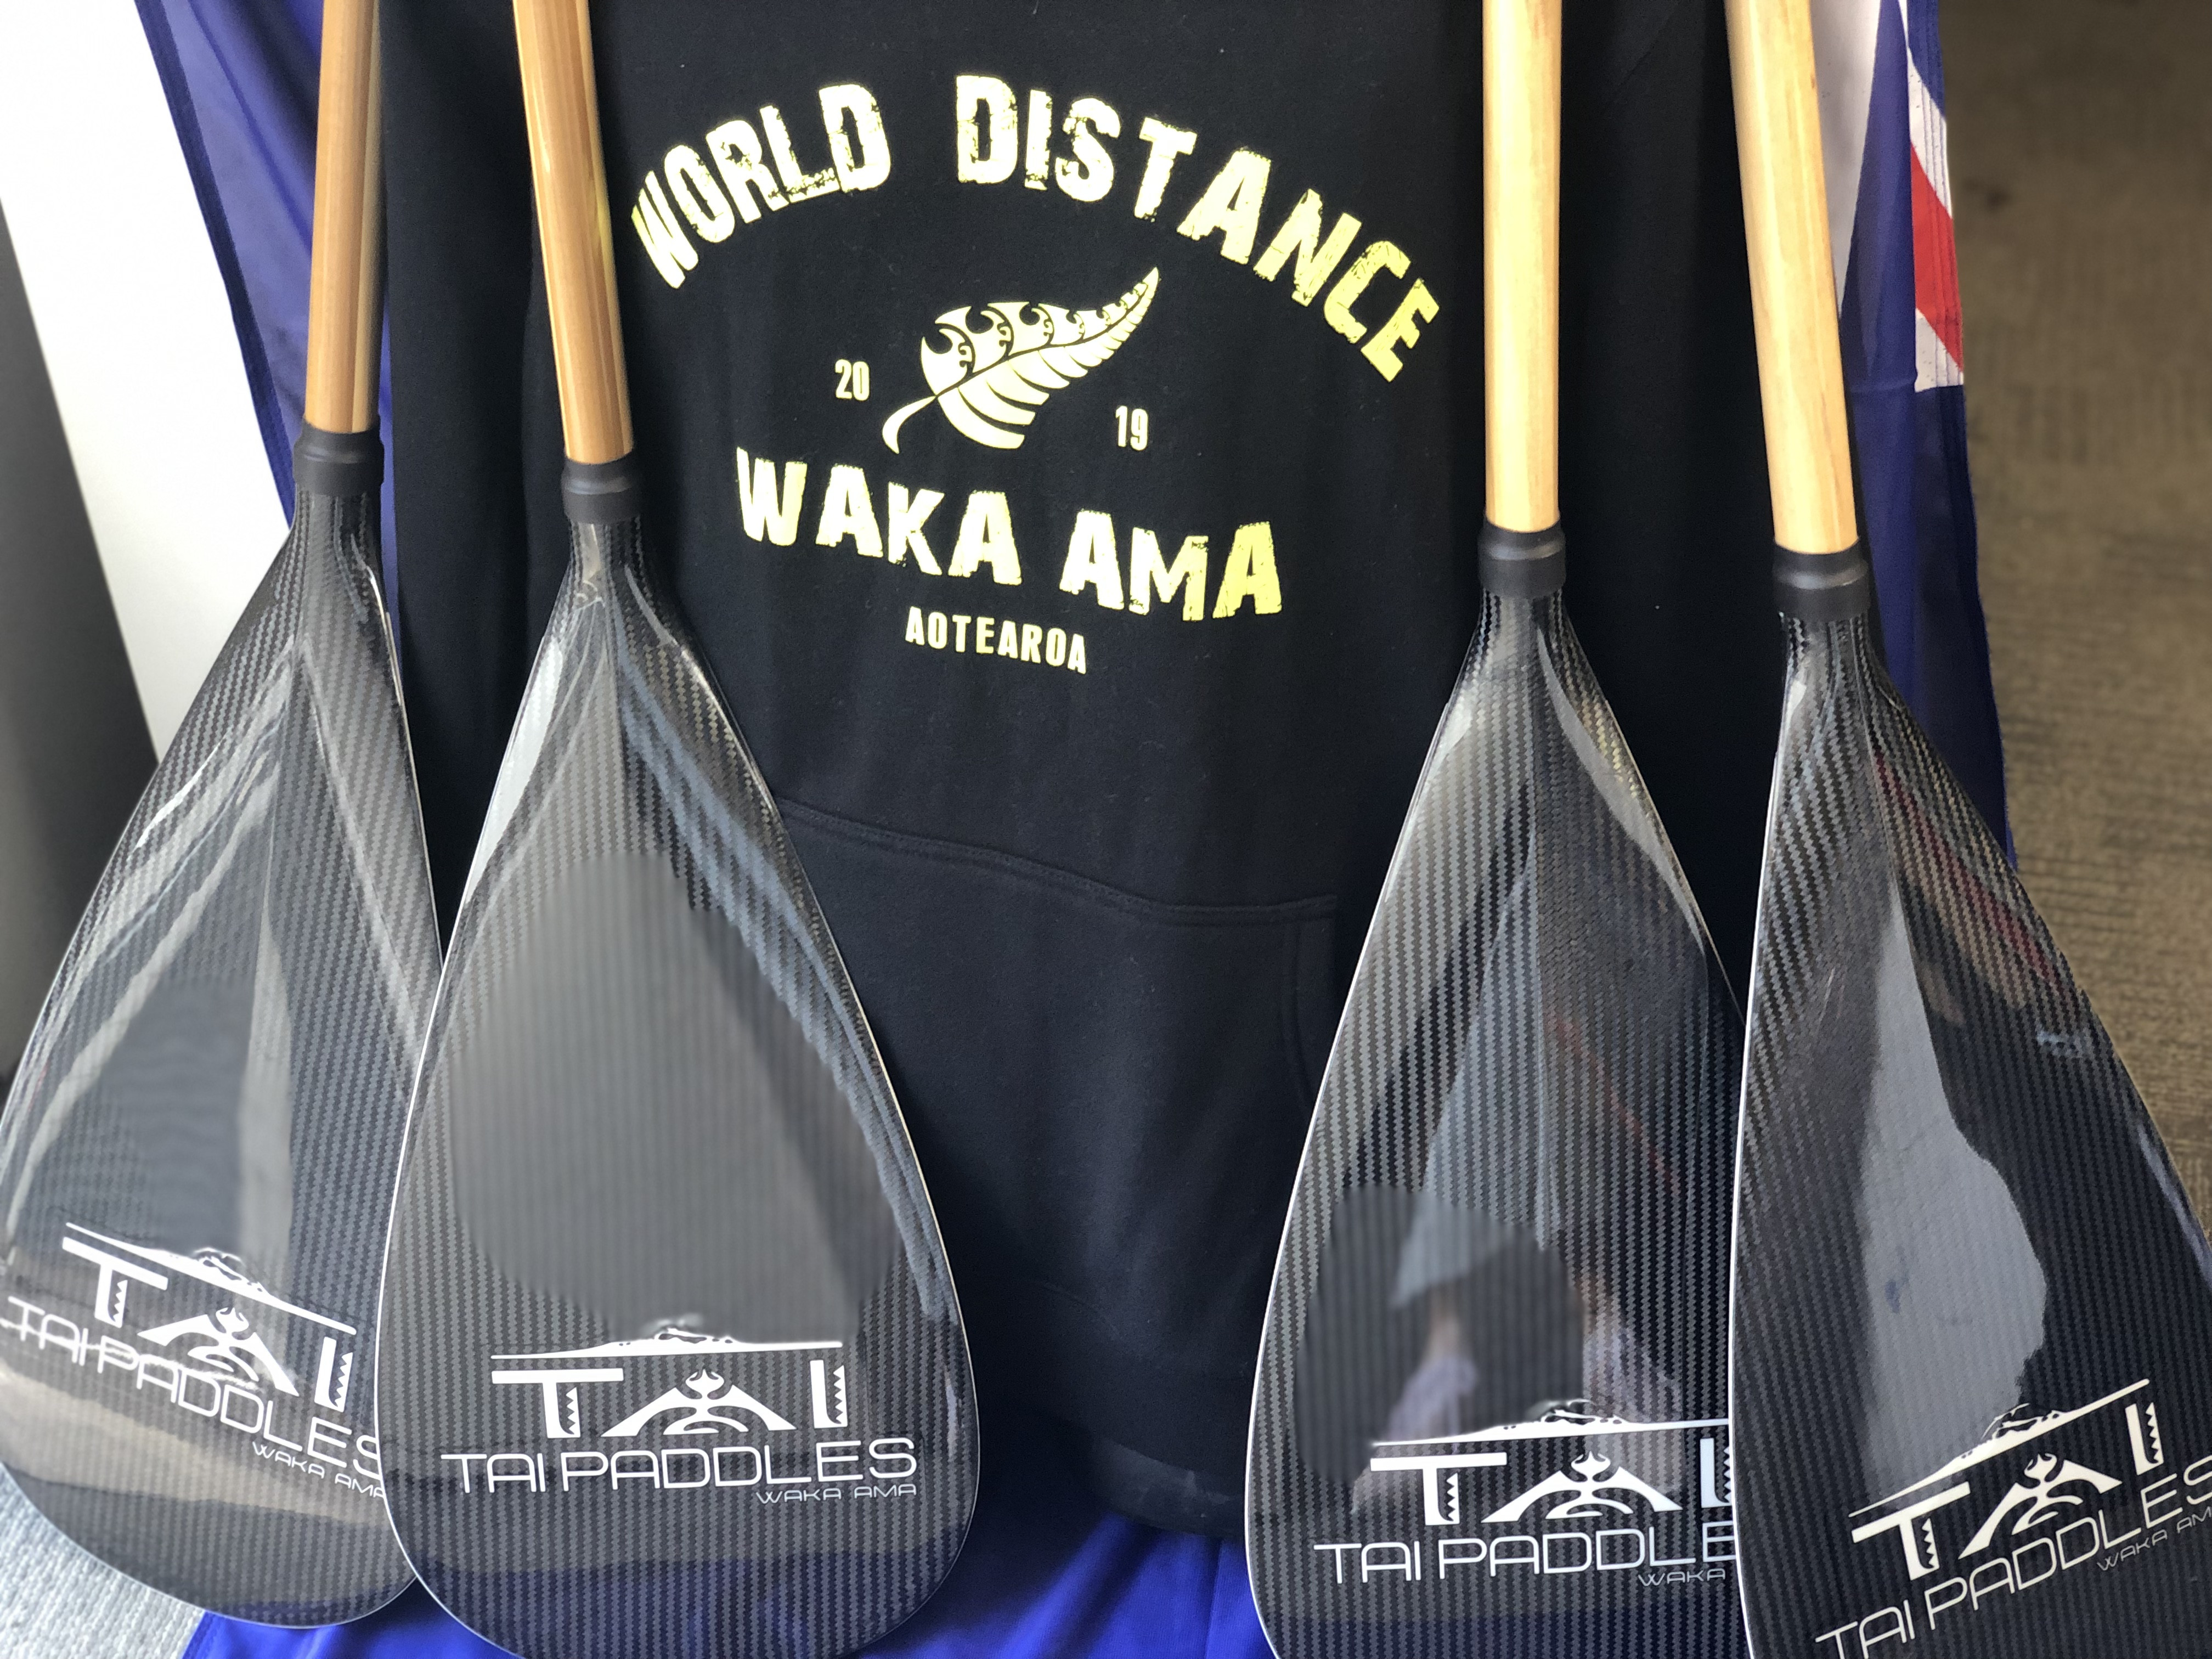 Tai Paddles - Ngā mihi maioha anō for your support of our World Elite Distance Campaign!